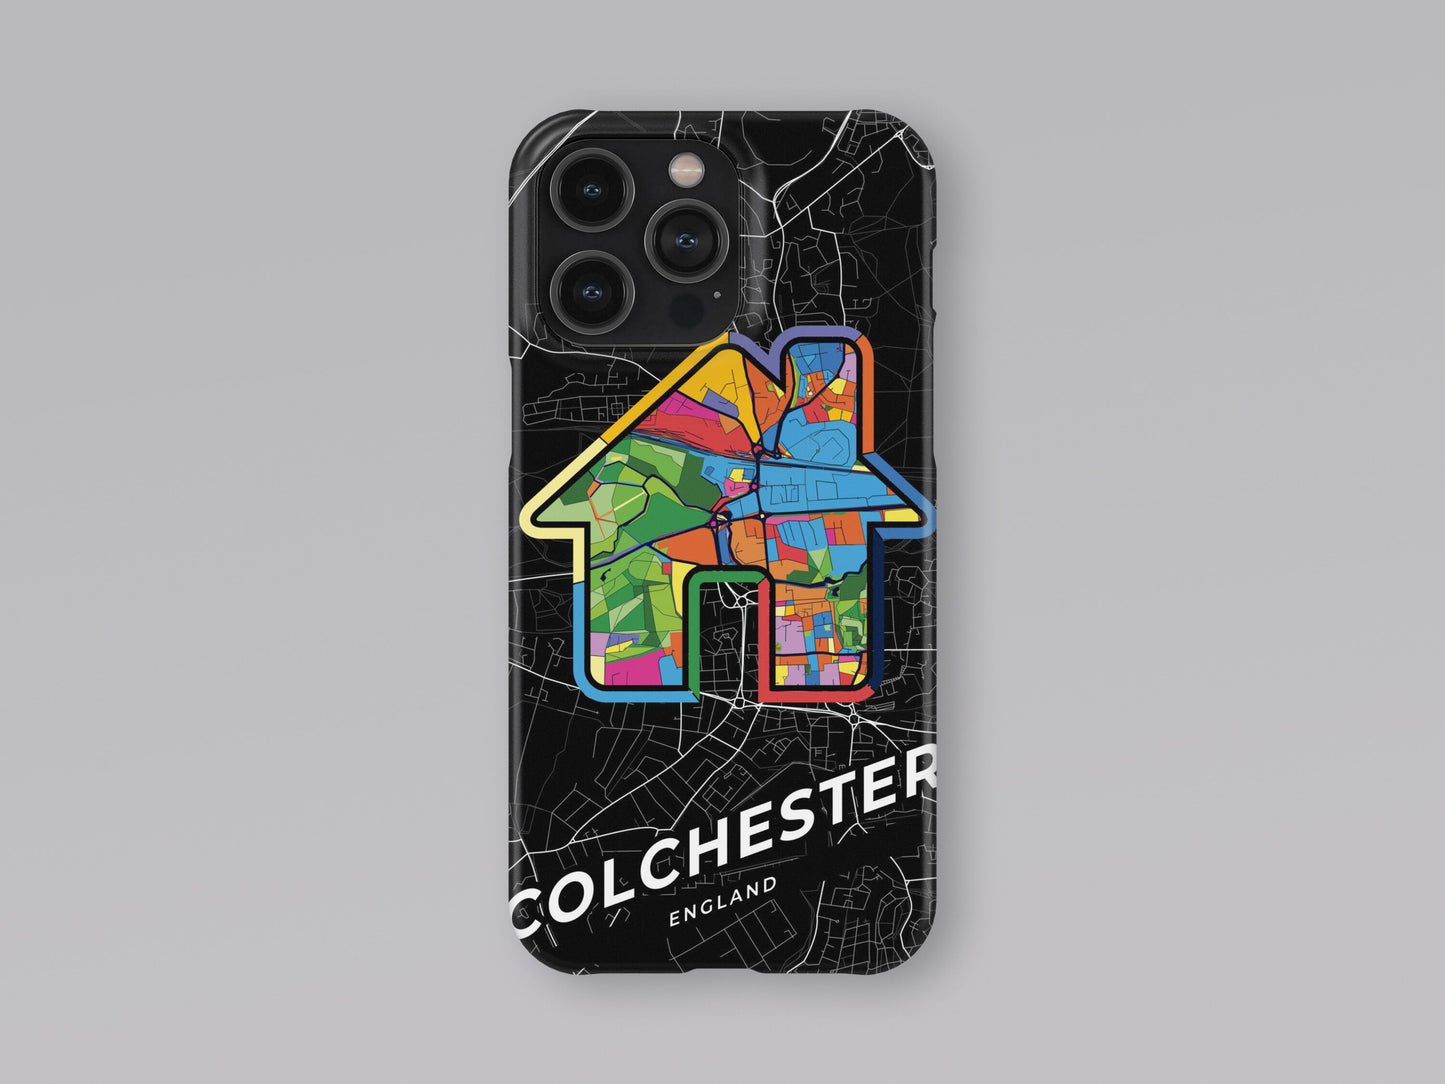 Colchester England slim phone case with colorful icon. Birthday, wedding or housewarming gift. Couple match cases. 3